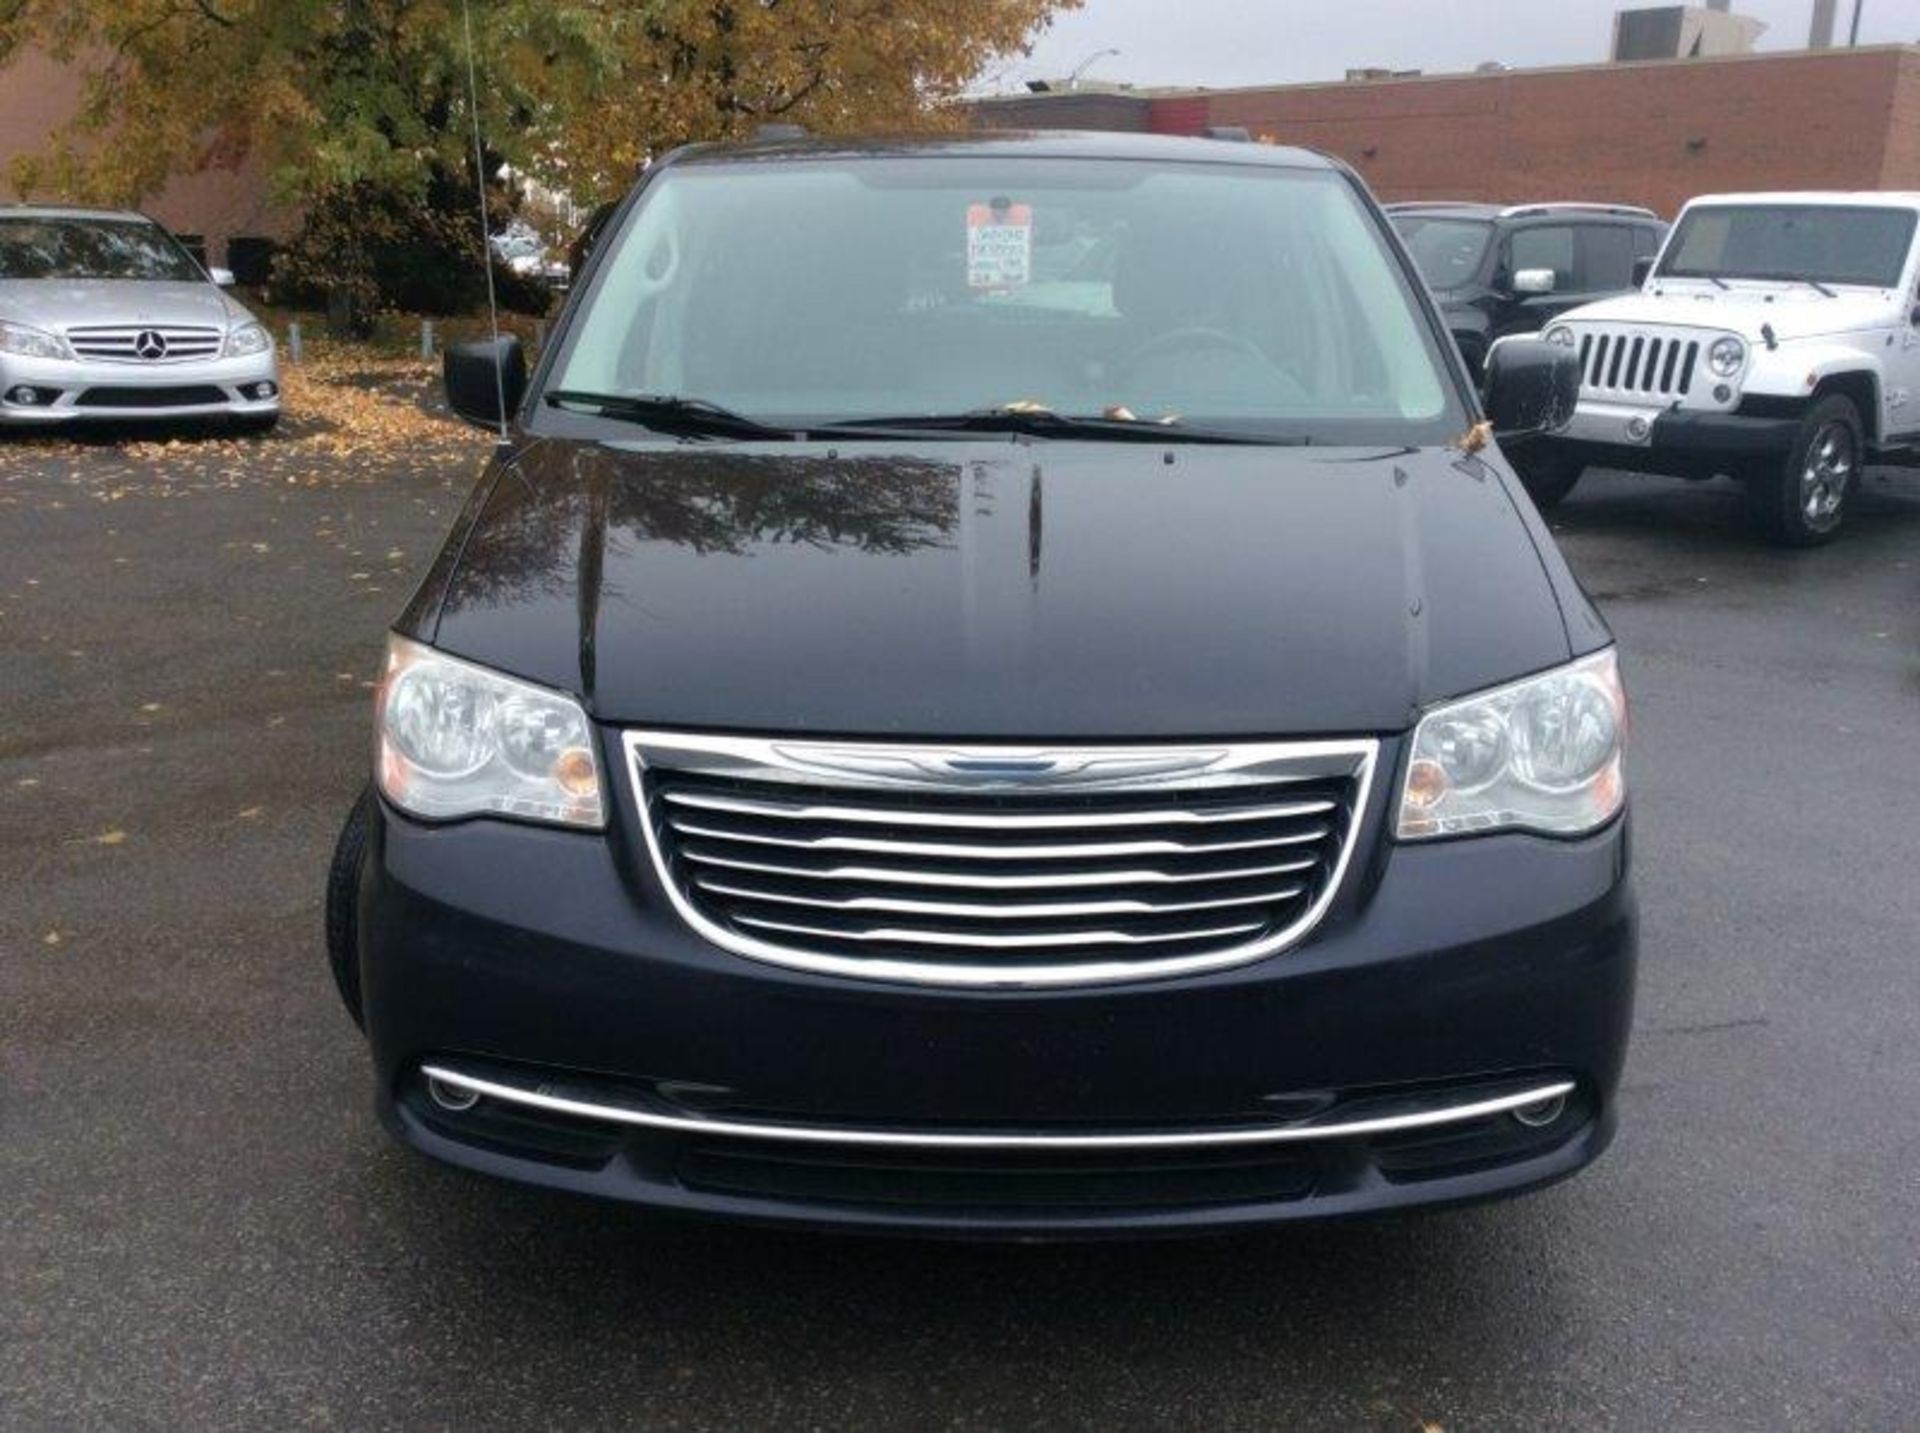 CHRYSLER TOWNCOUNTRY (2011) 133857 km - Image 2 of 19